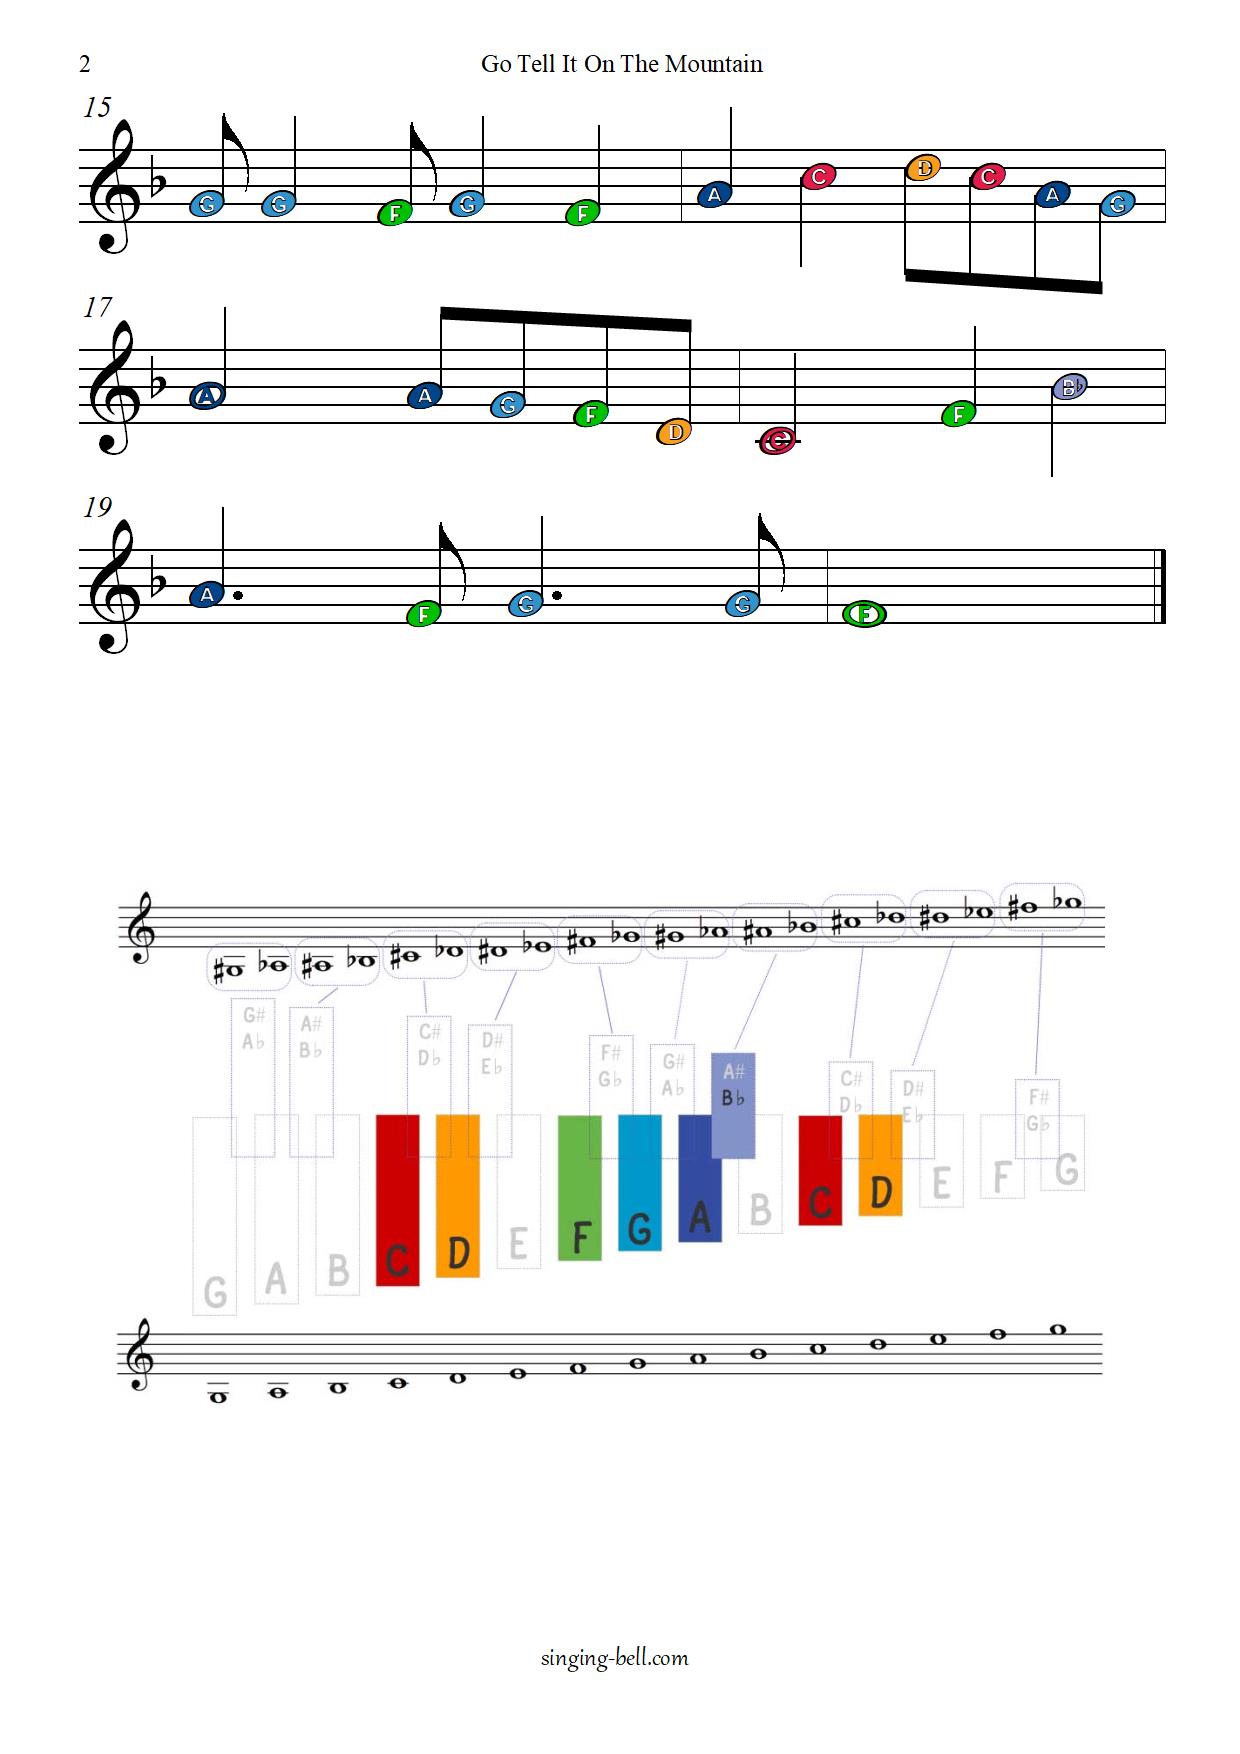 GoTell It On The Mountain free xylophone glockenspiel sheet music color notes chart pdf p.2